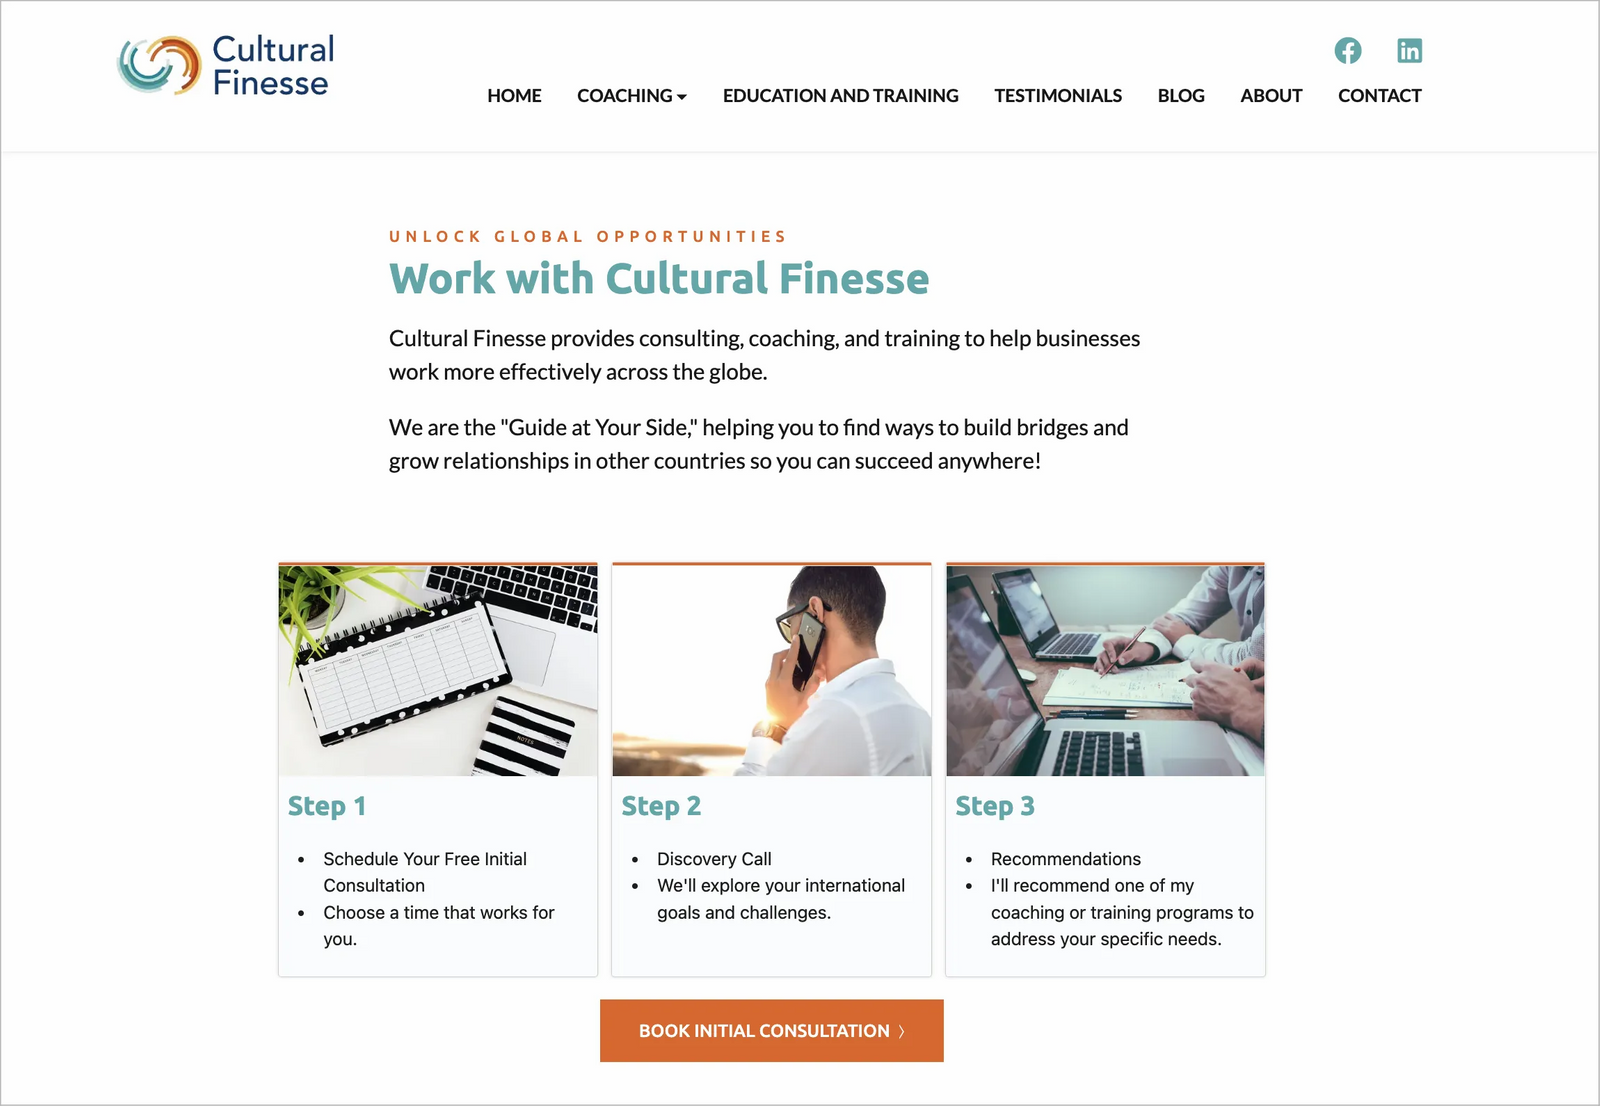 Screenshot of the how it works section on the cultural finesse website.